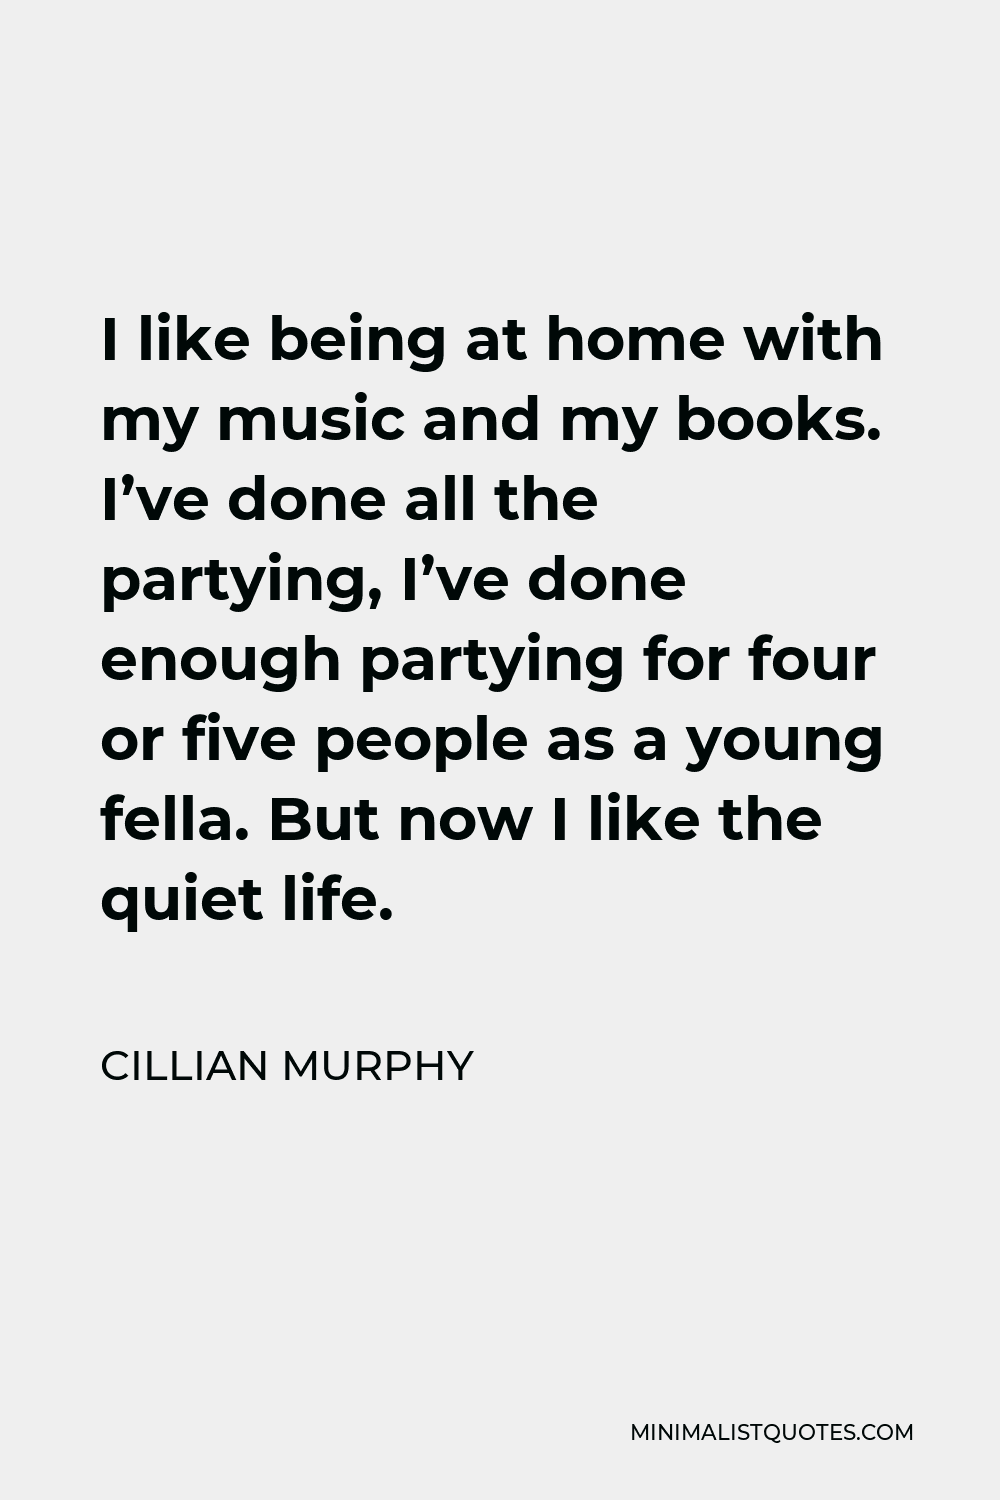 Cillian Murphy Quote - I like being at home with my music and my books. I’ve done all the partying, I’ve done enough partying for four or five people as a young fella. But now I like the quiet life.